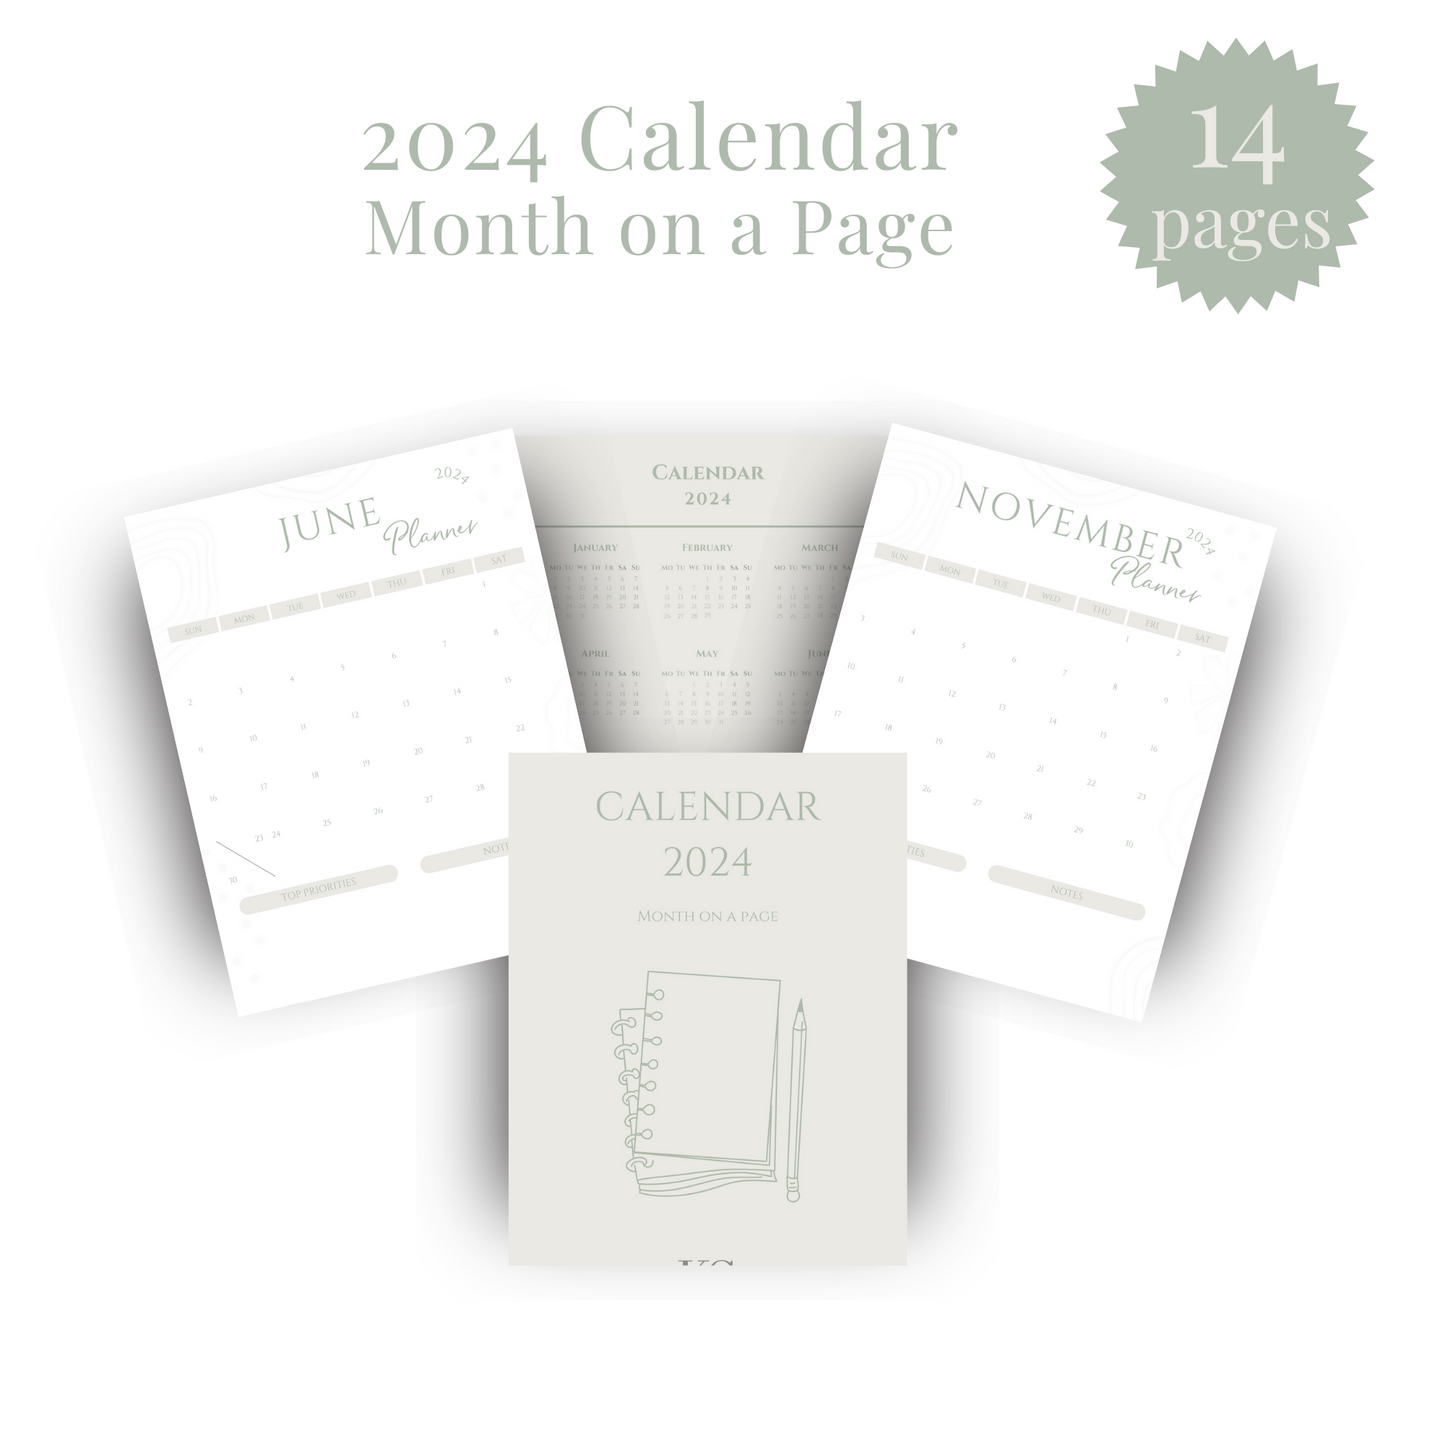 2024 Calendar Month on a Page